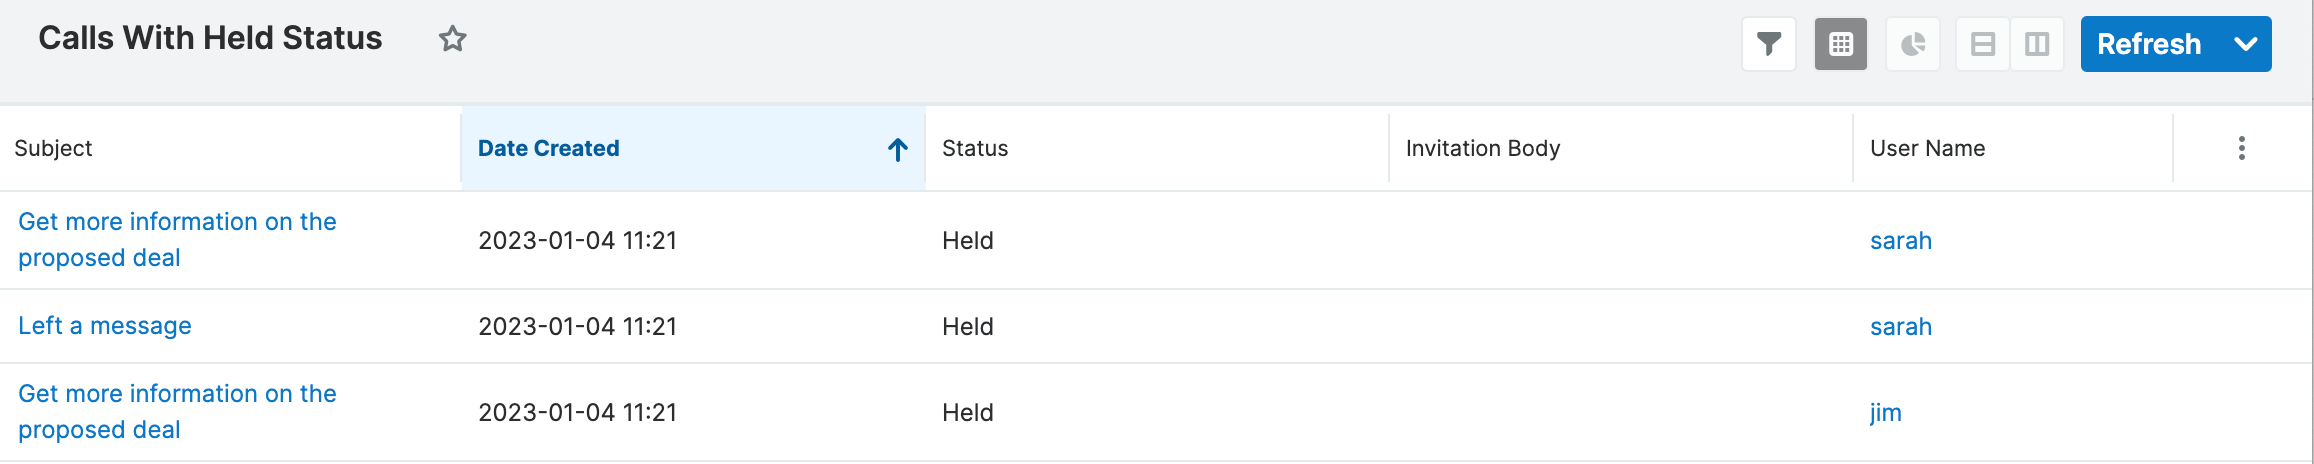 Calls With Held Status table